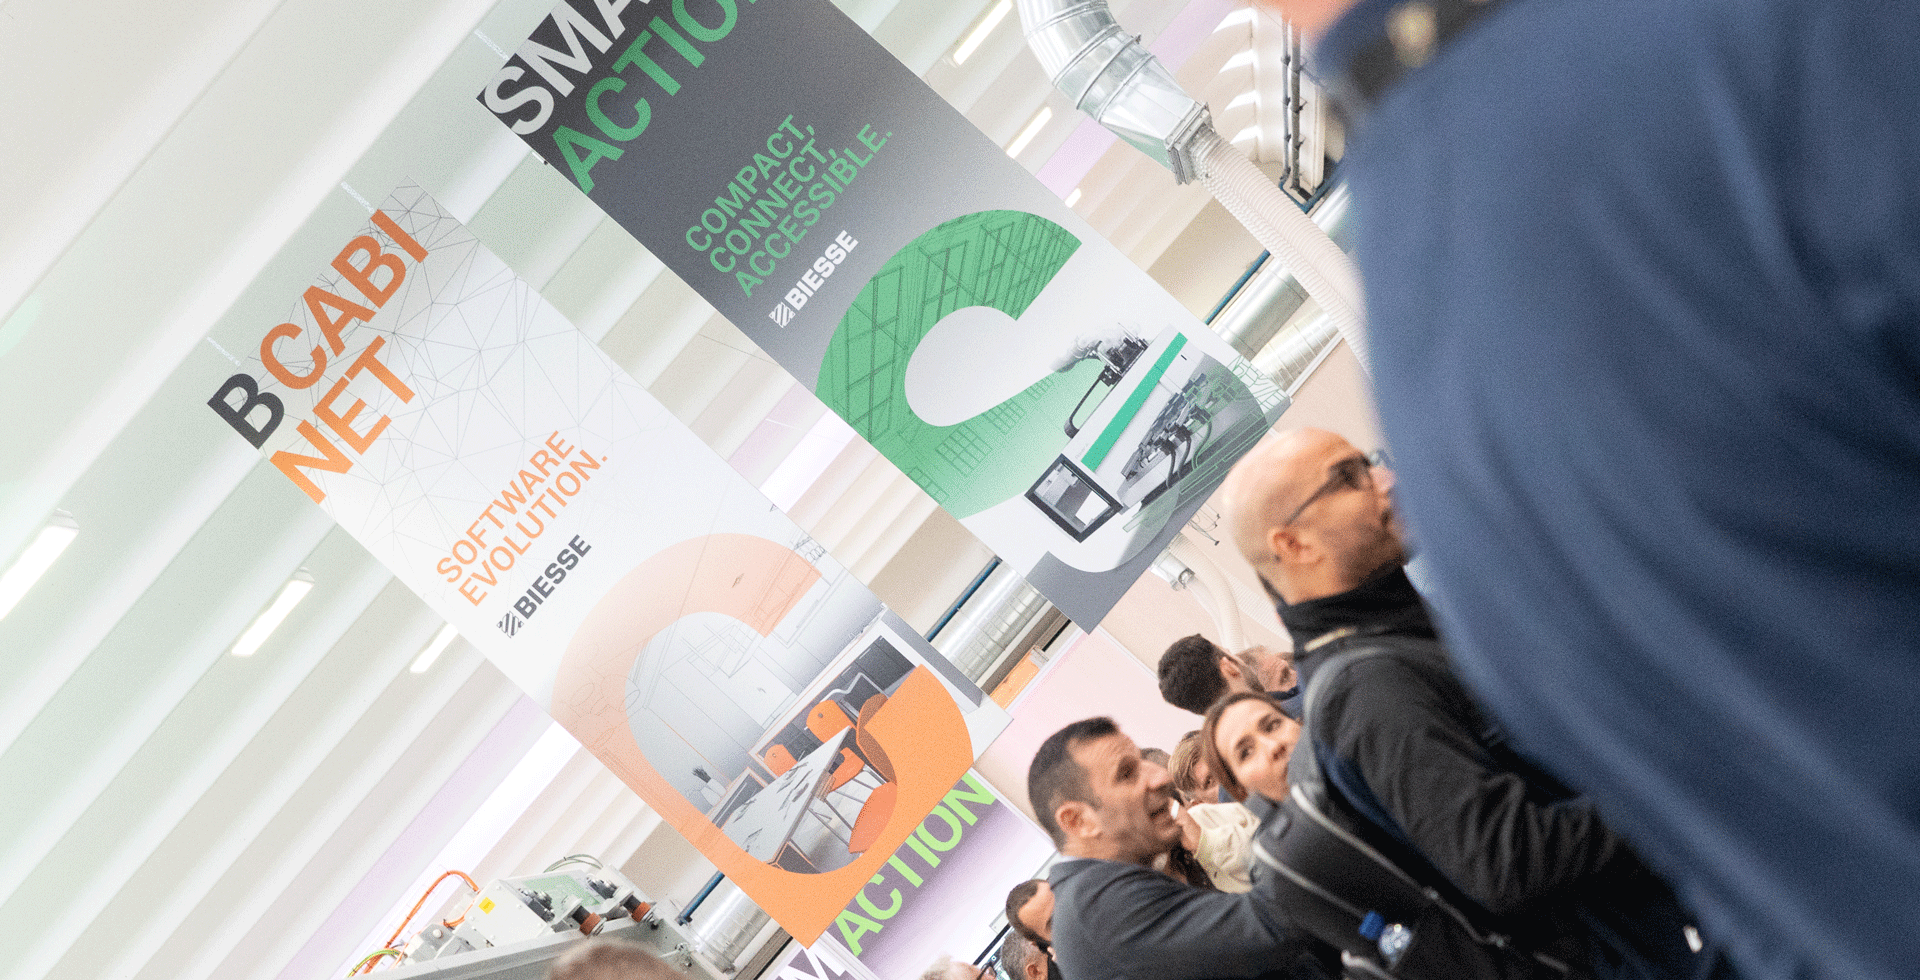 Inside Biesse 2019:  41 technologies, 3 days and over 3,000 visitors are a testament to the international success of the Inside event